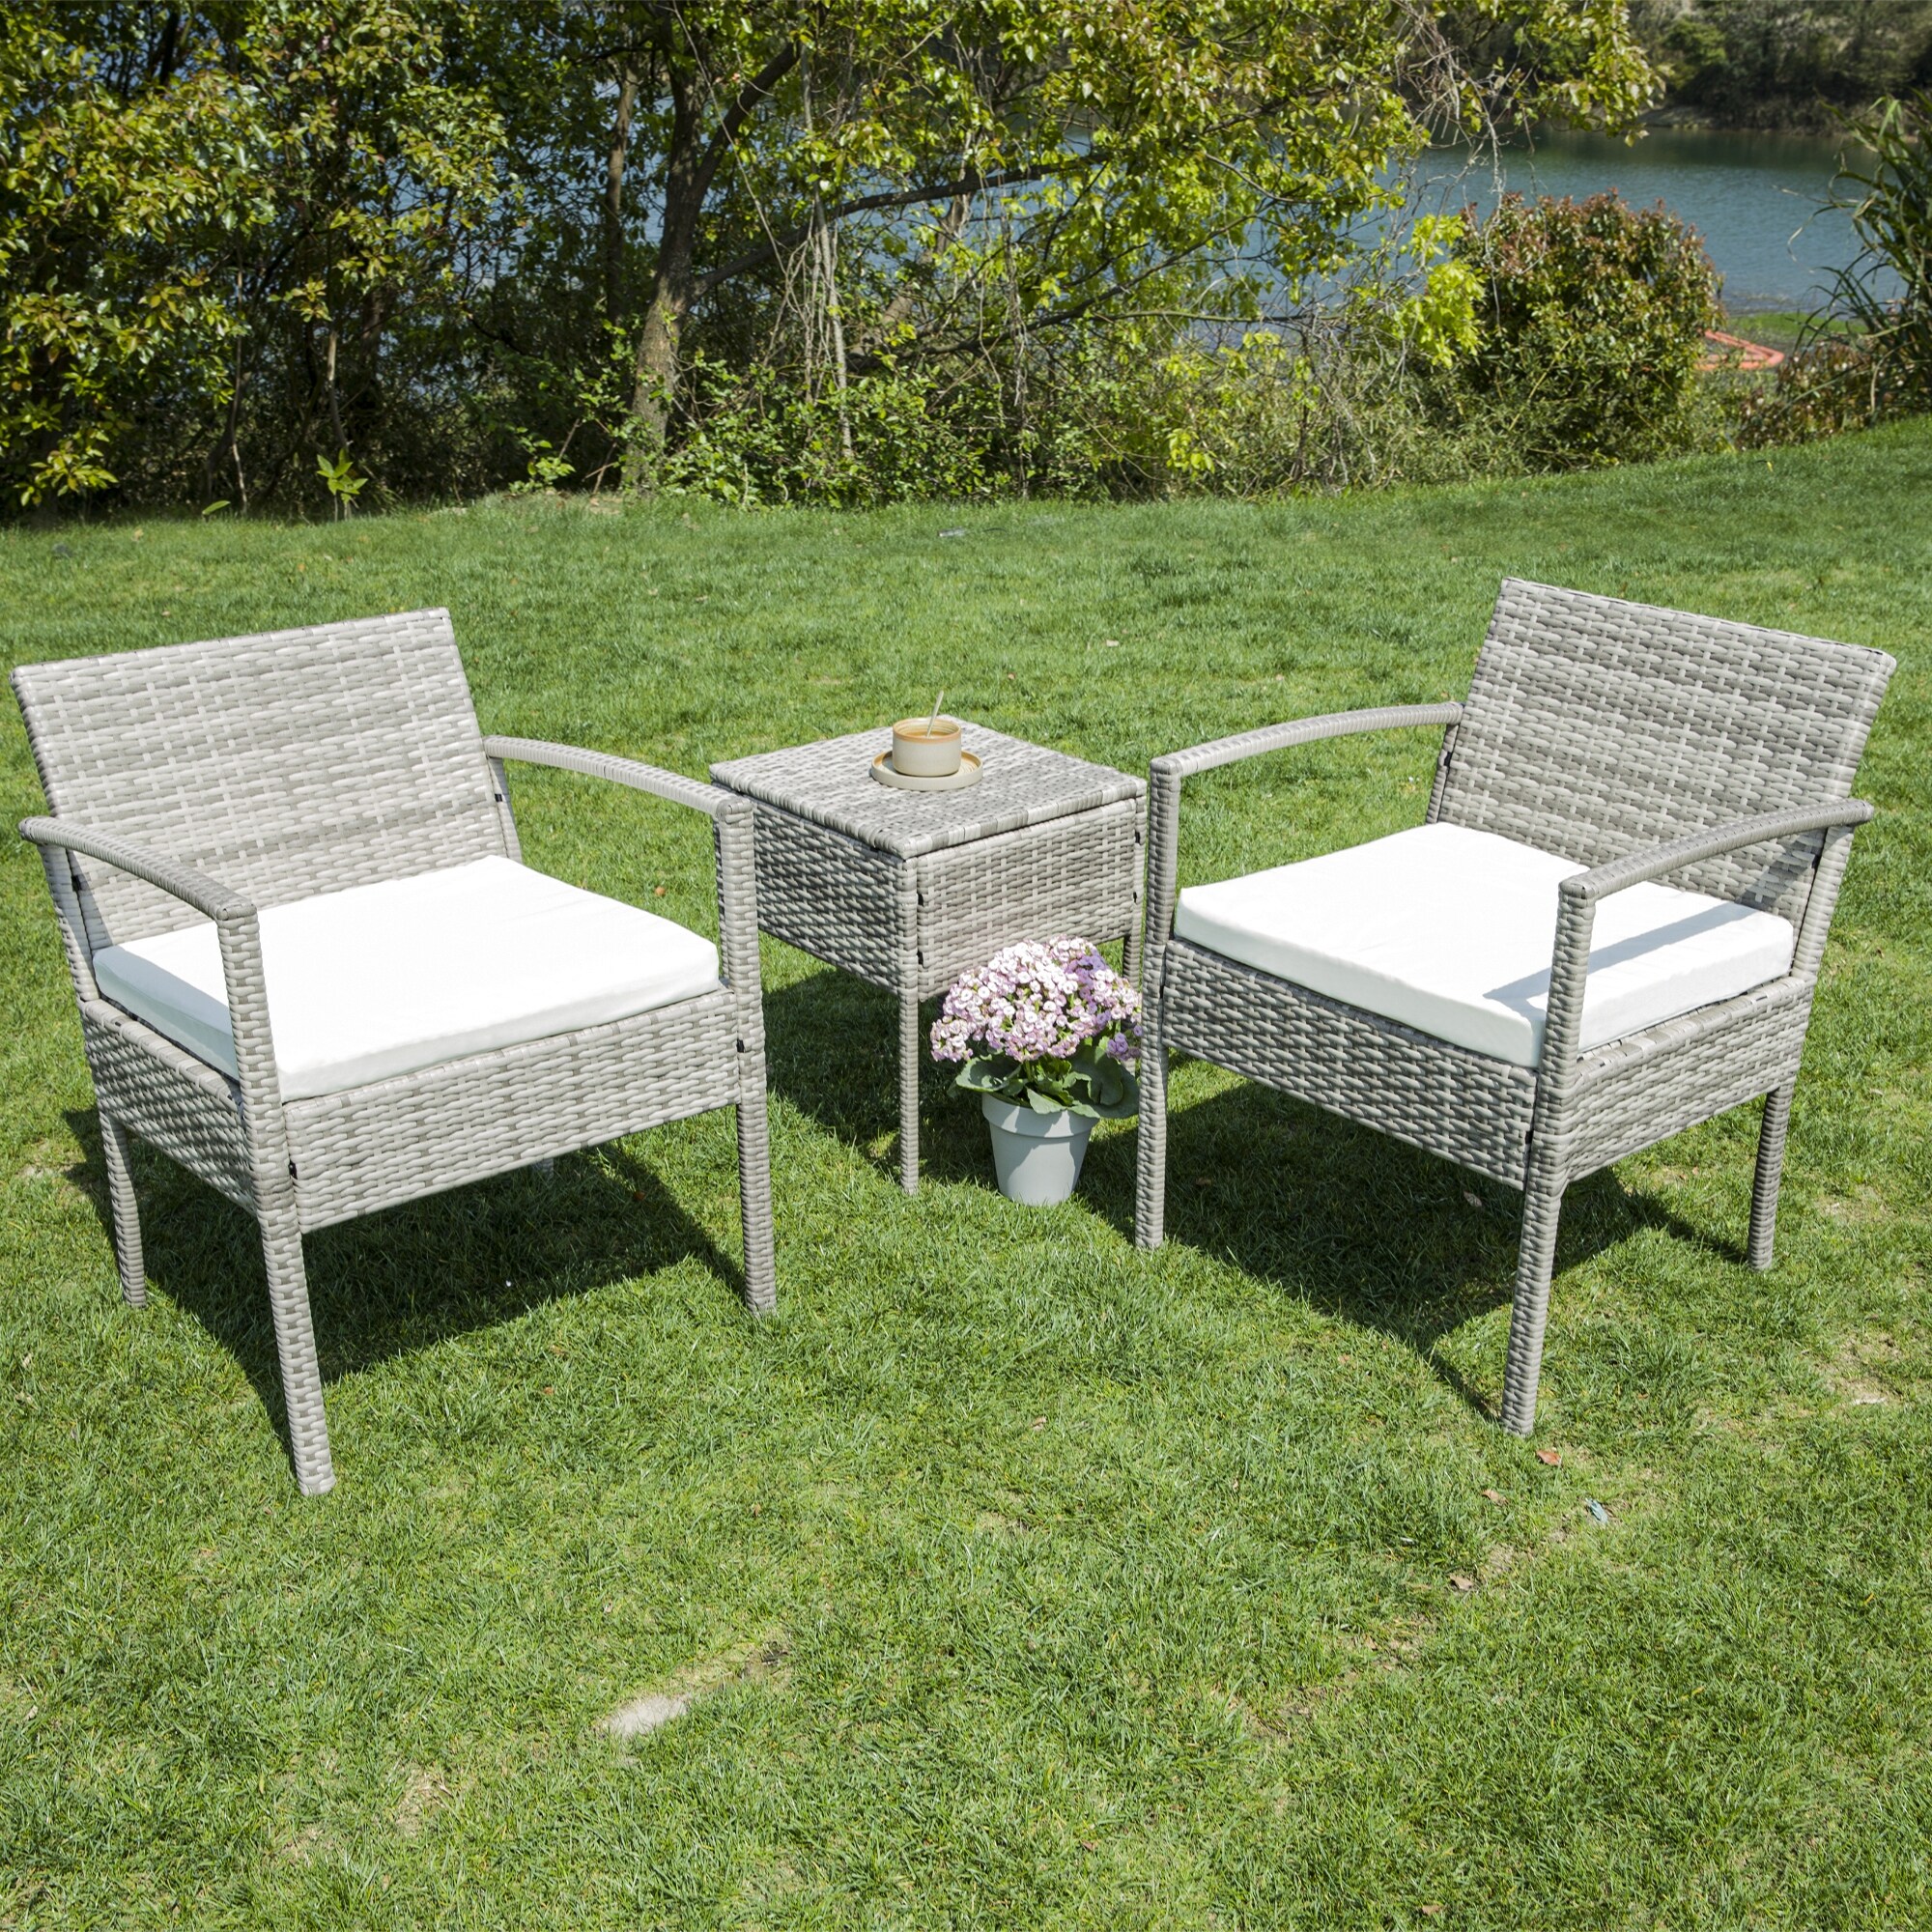 3-piece Outdoor Wicker Chat Set patio Chairs